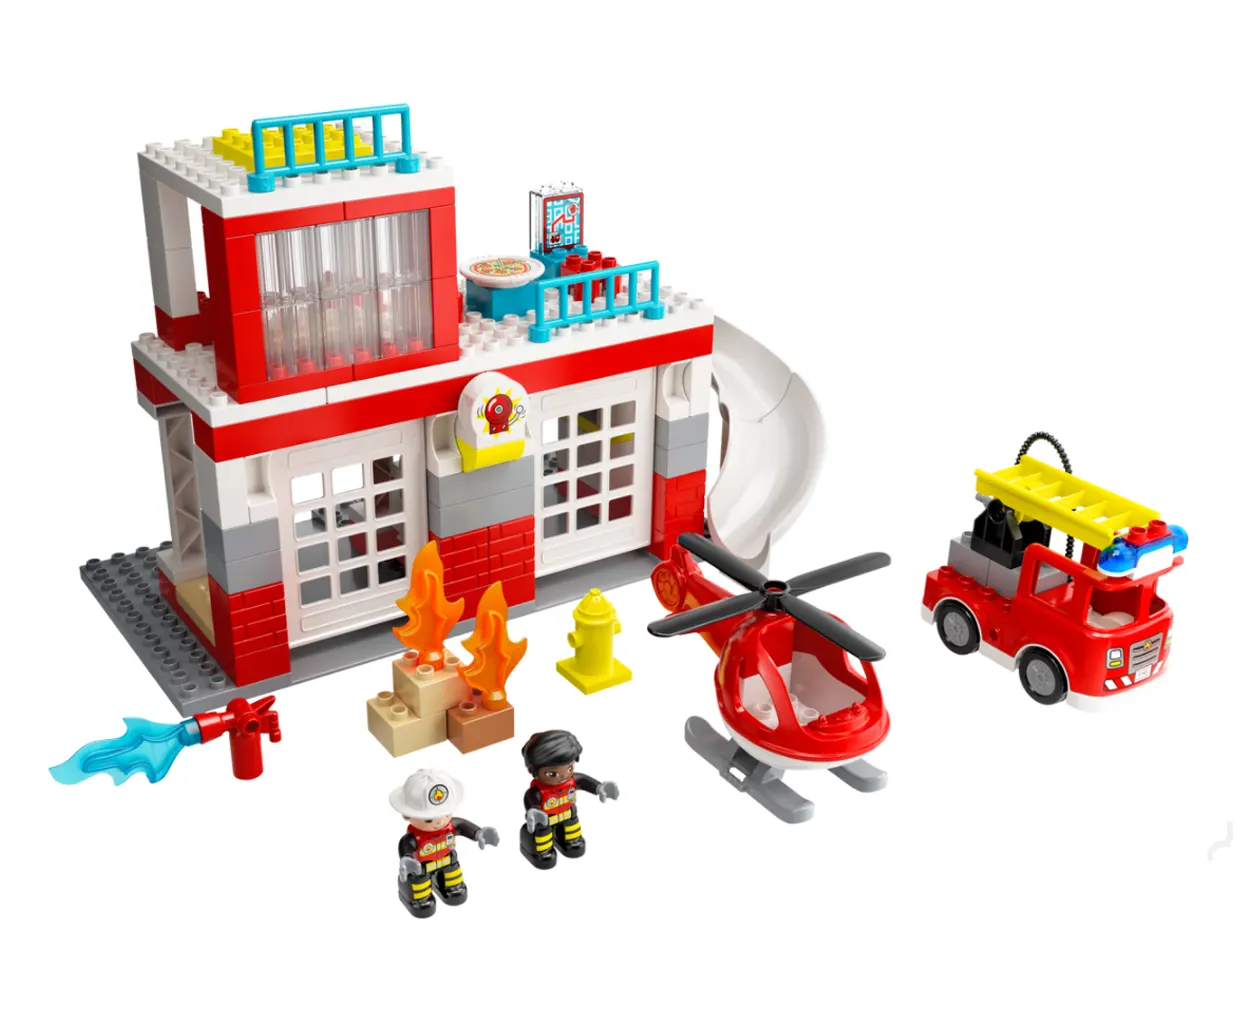 LEGO Duplo New Sets for March 2022 Revealed